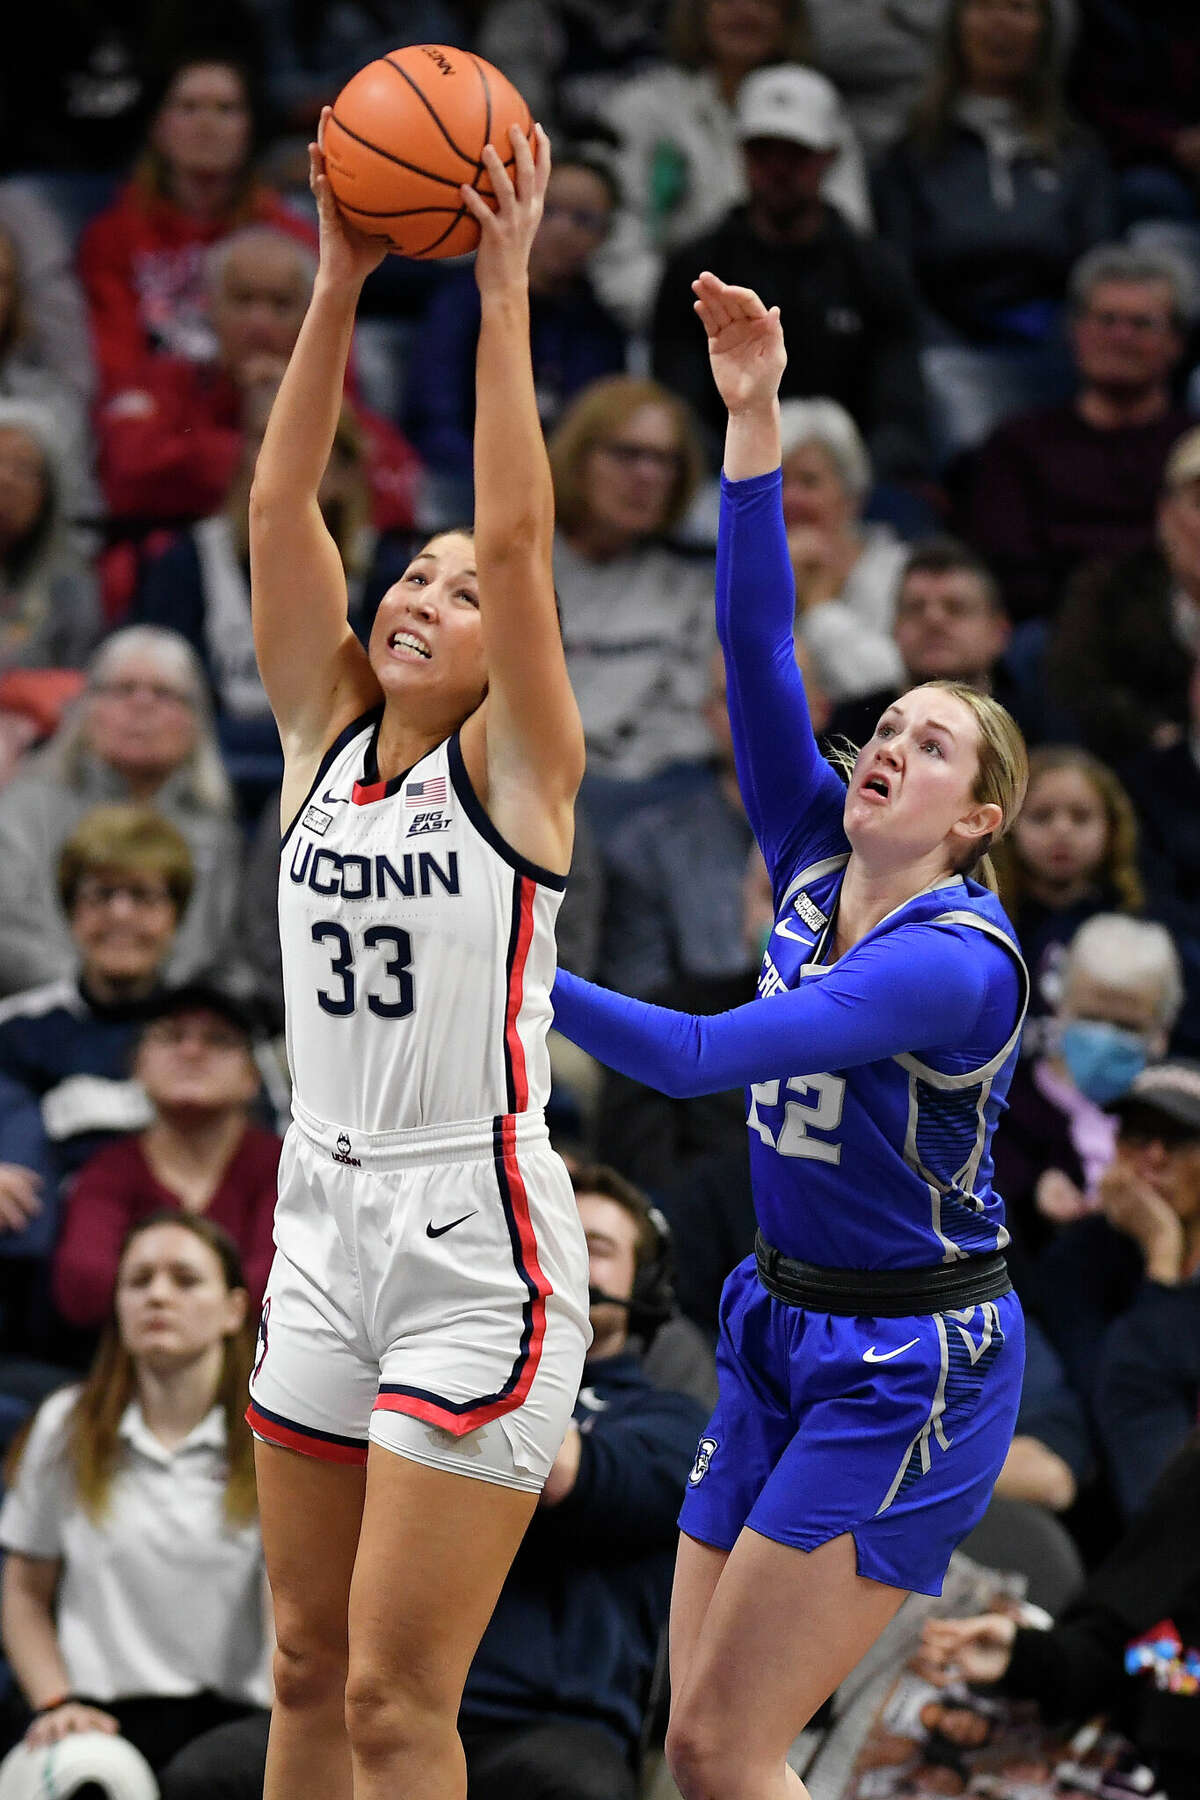 UConn's Caroline Ducharme (33) pulls in a rebound next to Creighton's Carly Bachelor (22) during the first half of an NCAA college basketball game Wednesday, Feb. 15, 2023, in Storrs, Conn. (AP Photo/Jessica Hill)